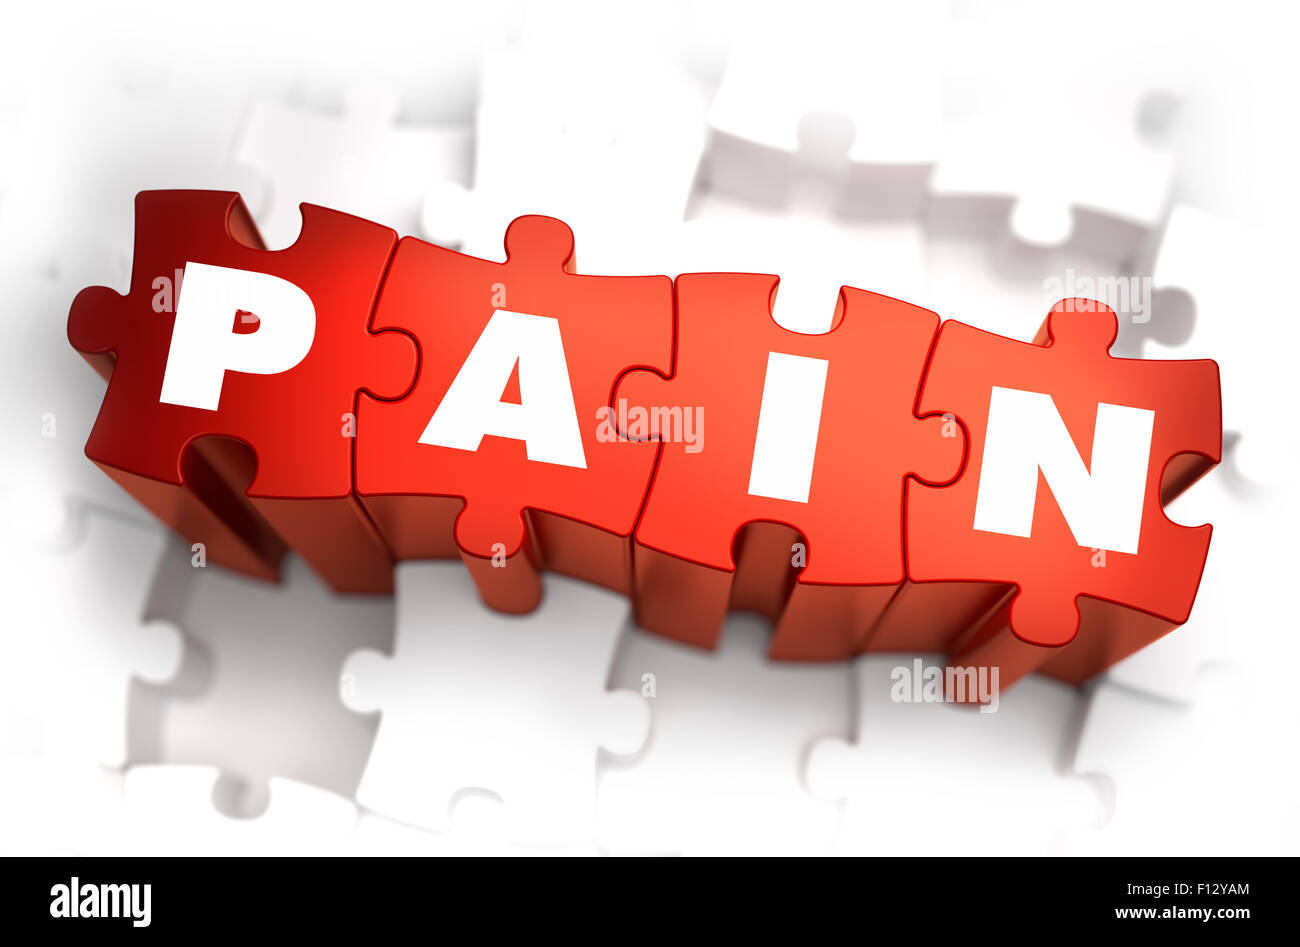 Pain - White Word on Red Puzzles. Stock Photo